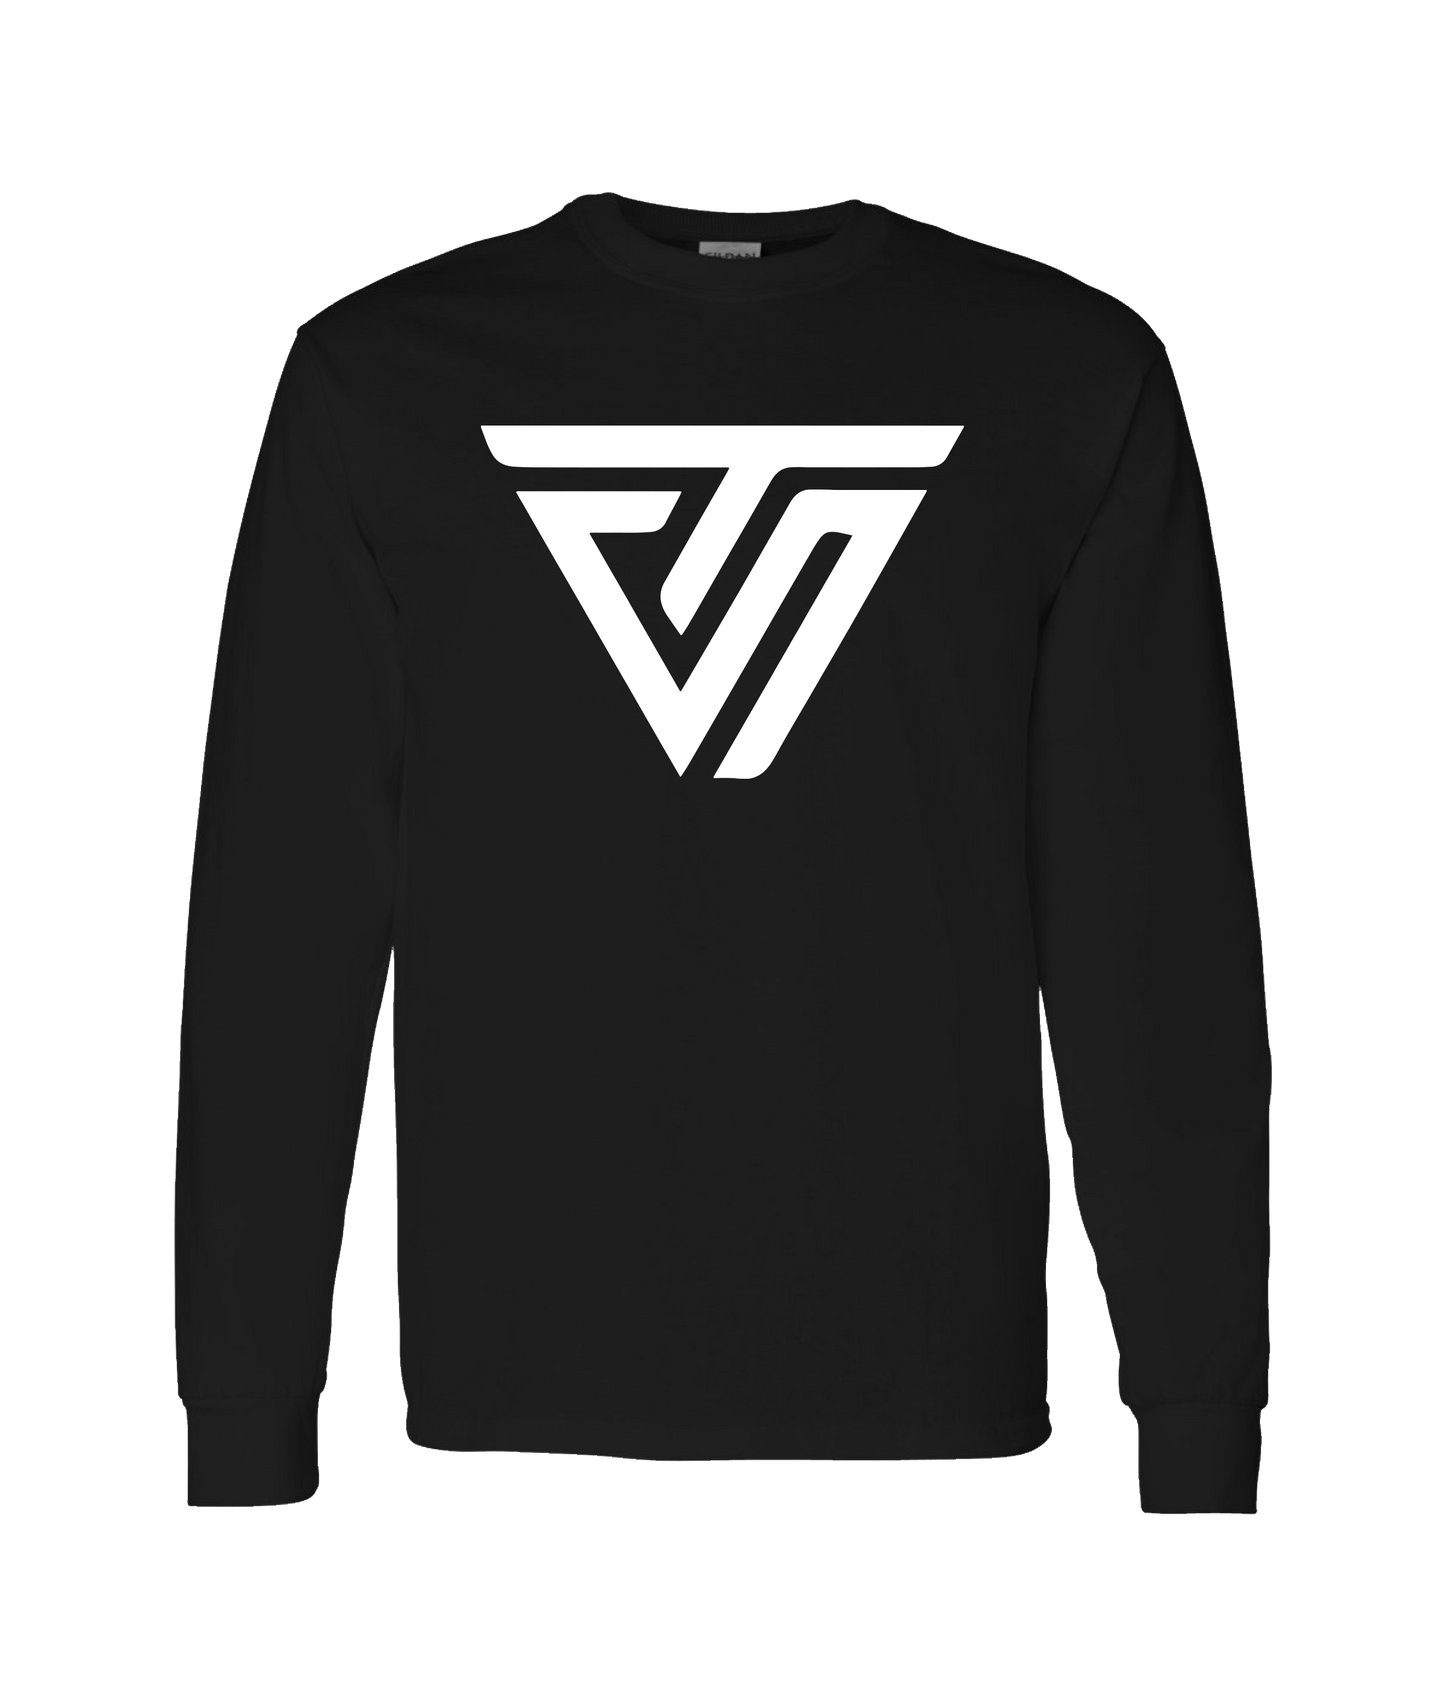 TheShift - The Triangle - Black Long Sleeve T